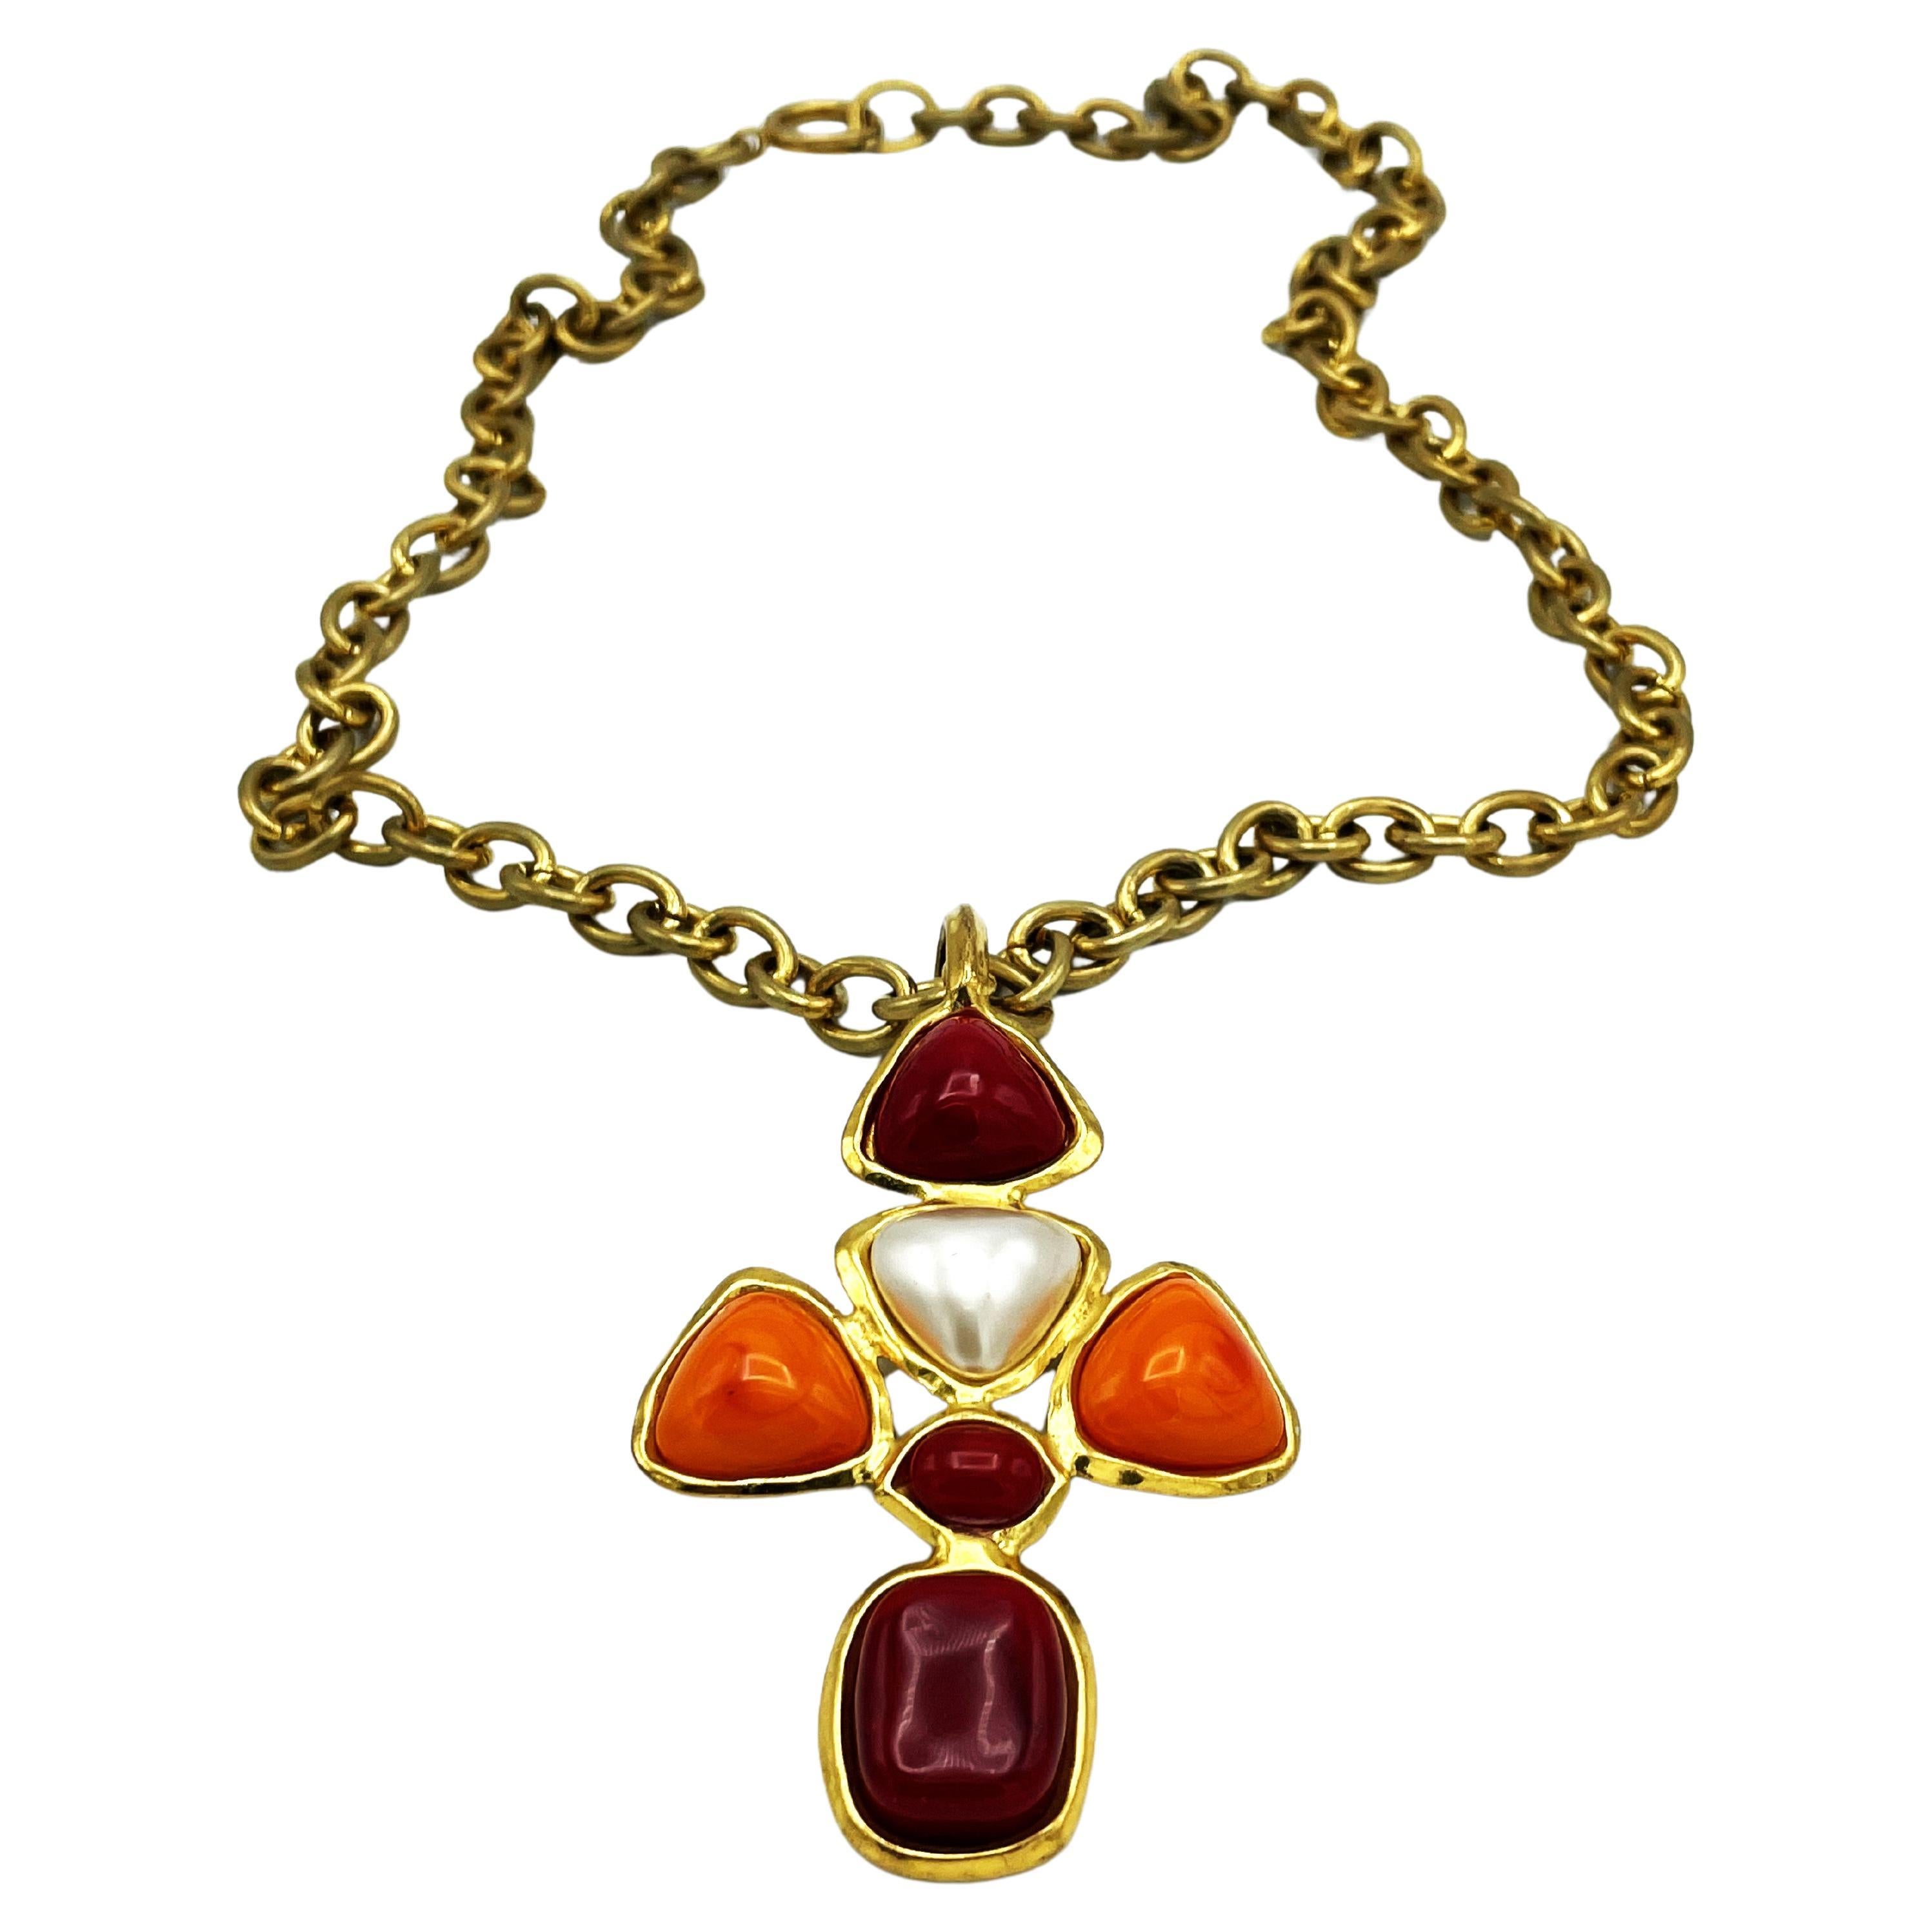 CHANEL CROSS NECKLACE wine red + orange Gripoix glass, faux pearl, signed 93 P For Sale